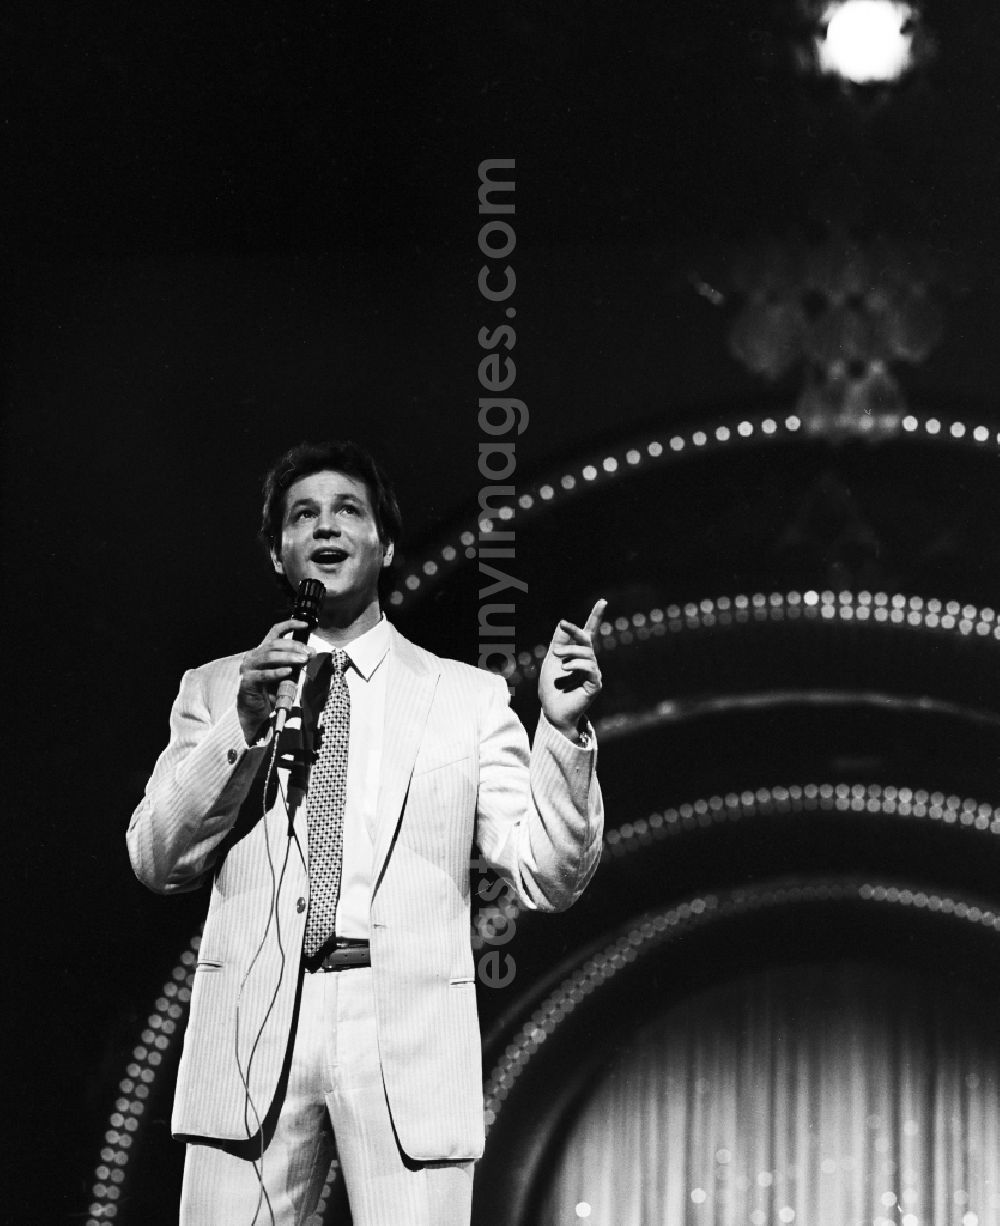 GDR photo archive: Berlin - The crooner Gerd Christian in an appearance on the Saturday evening show Ein Kessel Buntes at the Friedrichstadtpalast in Berlin, the former capital of the GDR, the German Democratic Republic